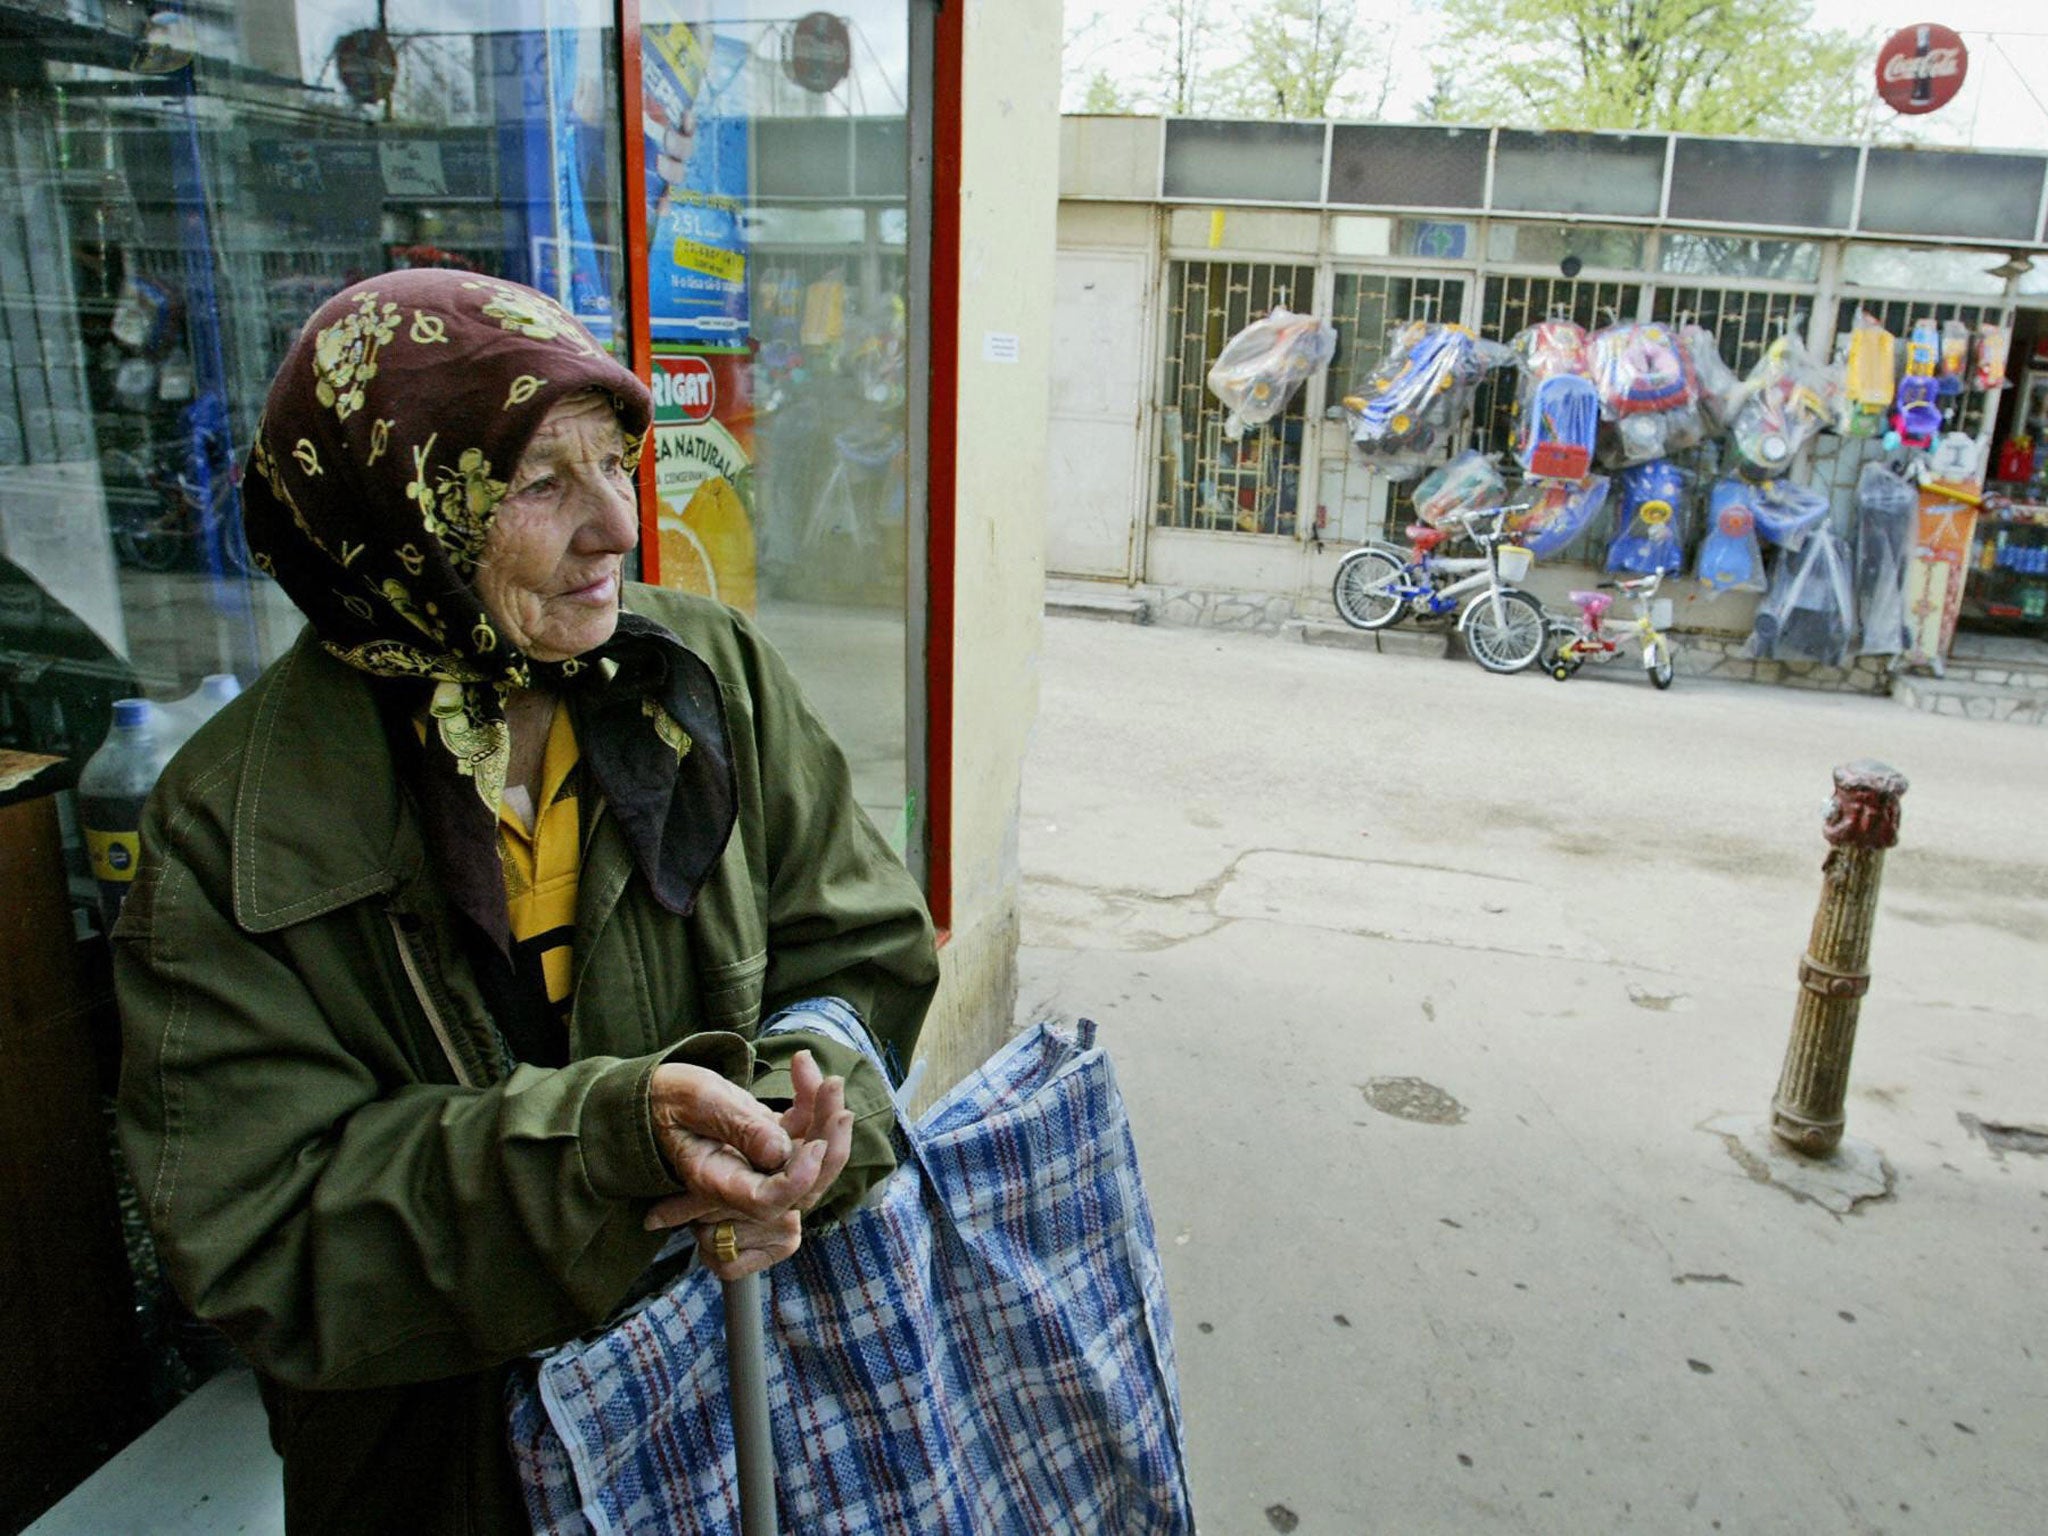 A Romanian woman beggar waits in the front of a shop near Piata Sudului market place in Bucharest.